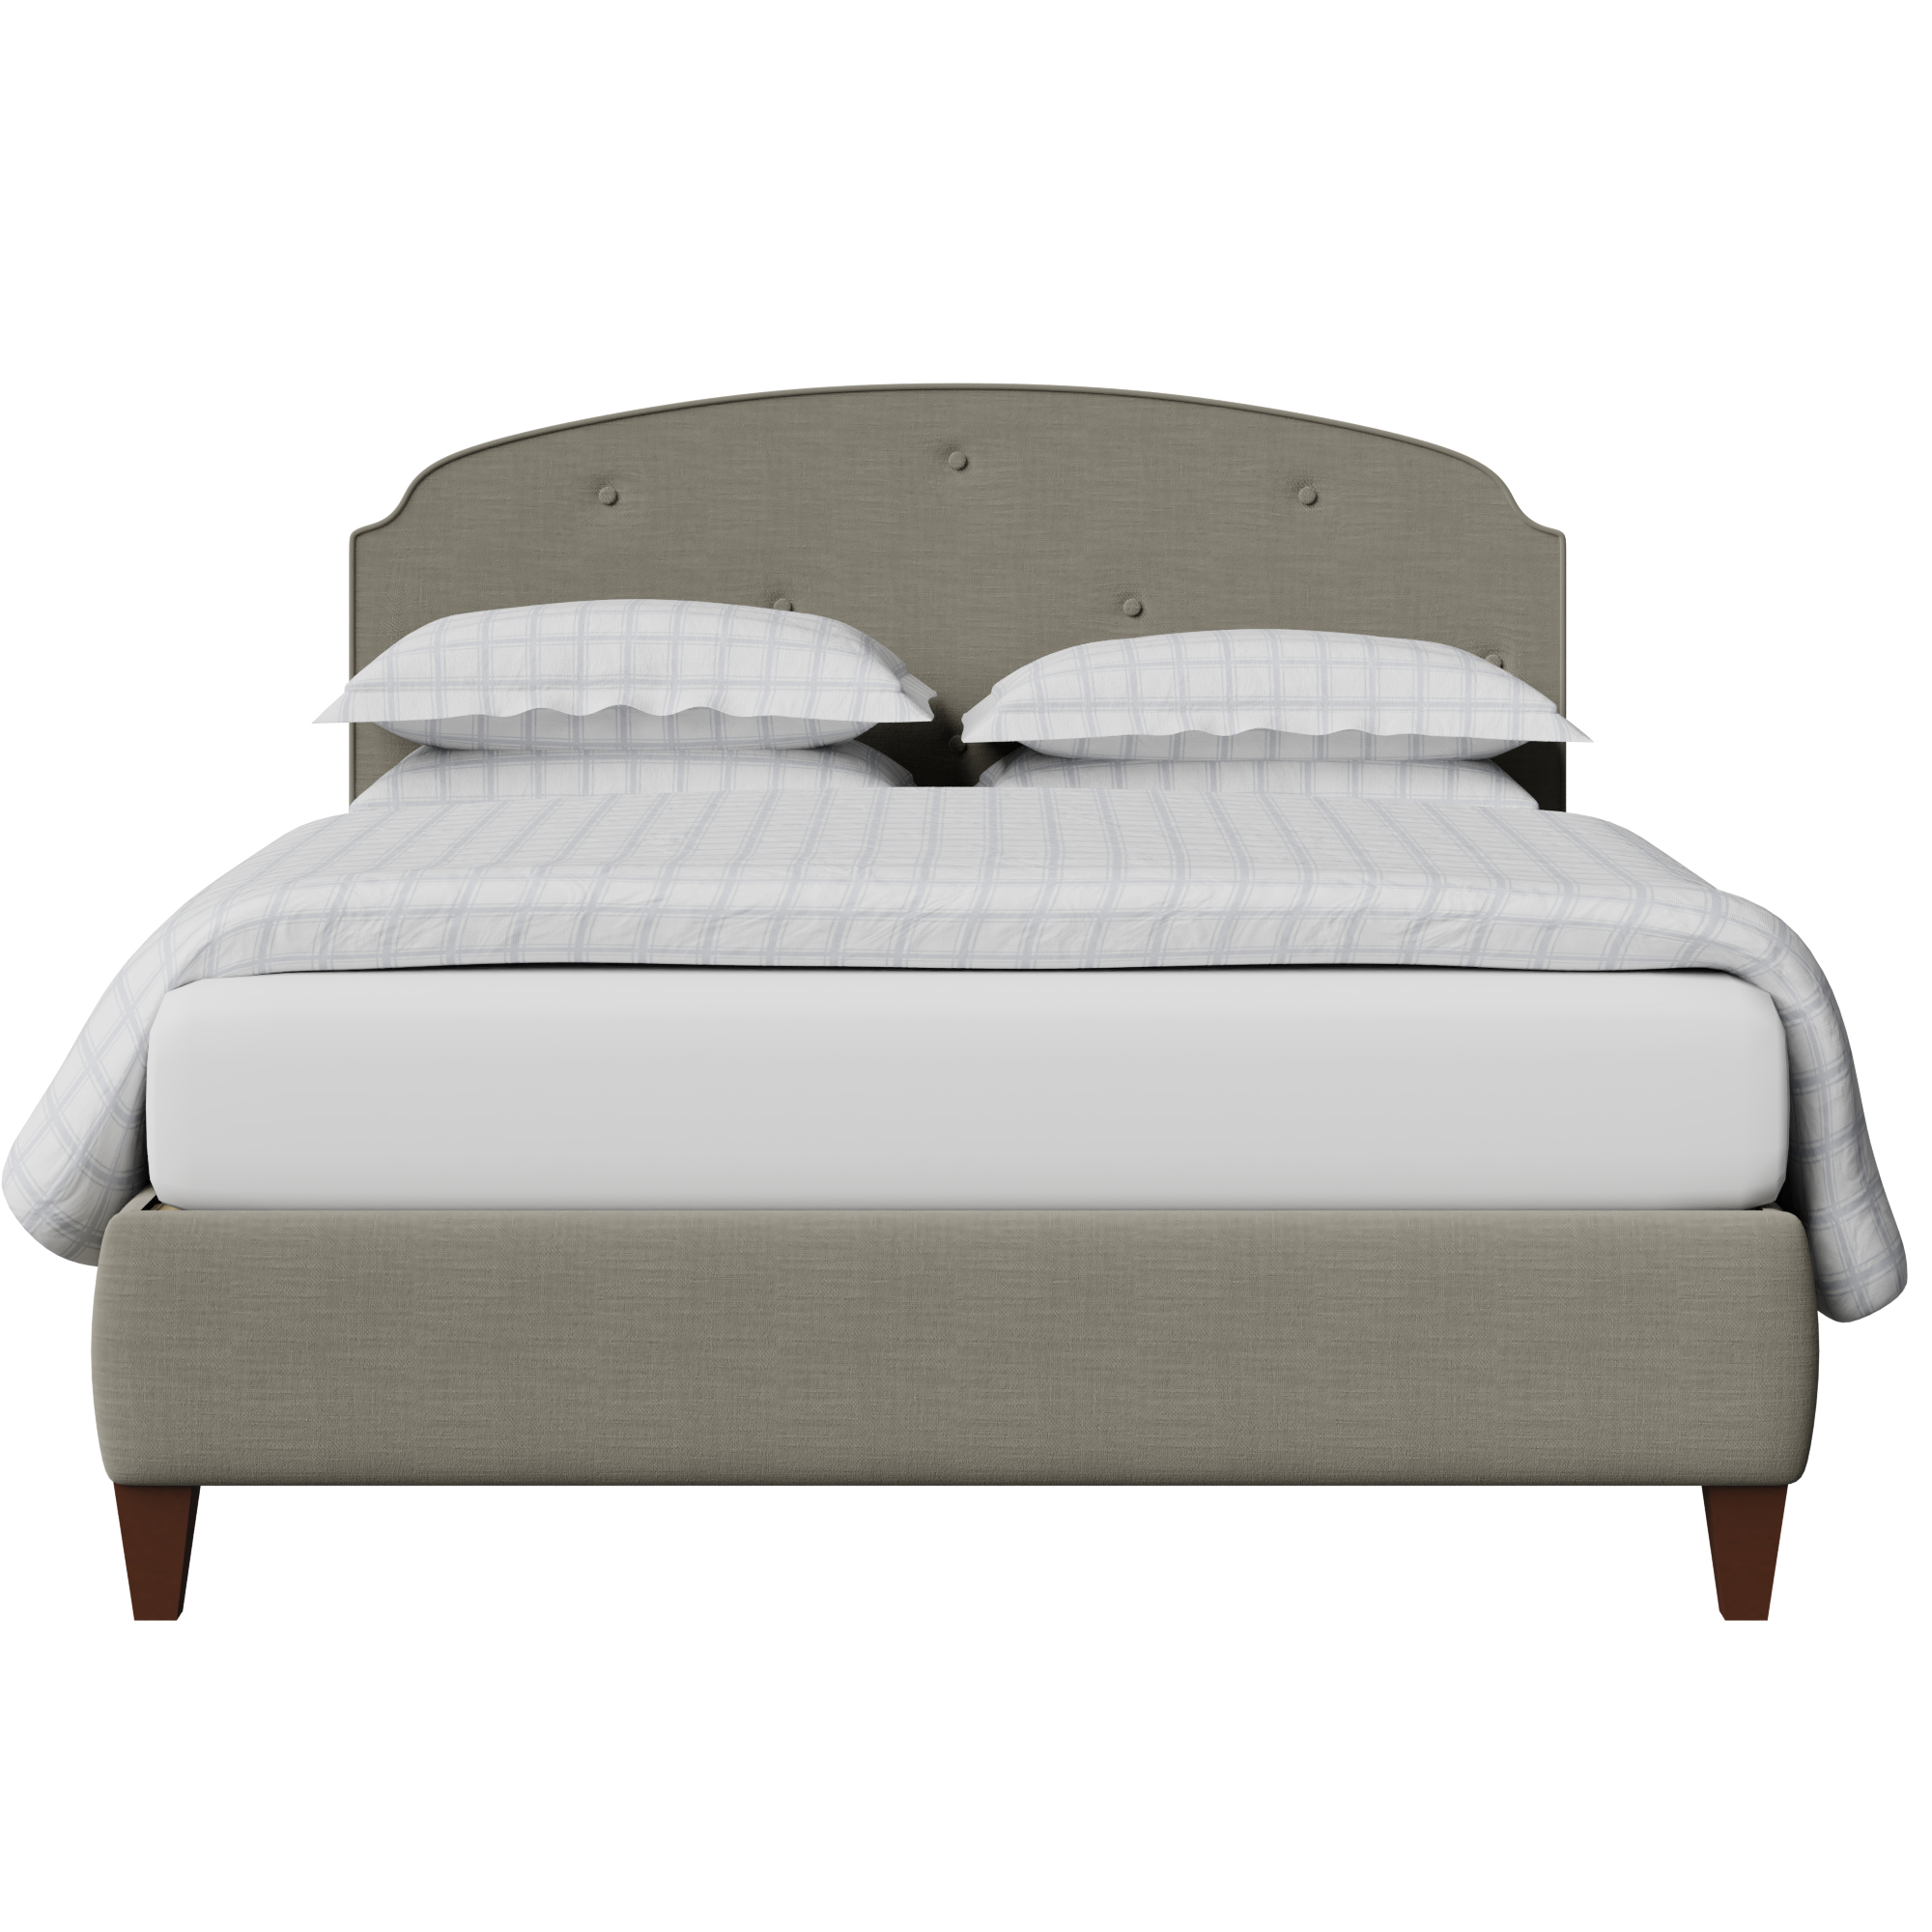 Lide Buttoned Diagonal stoffen bed in grijs